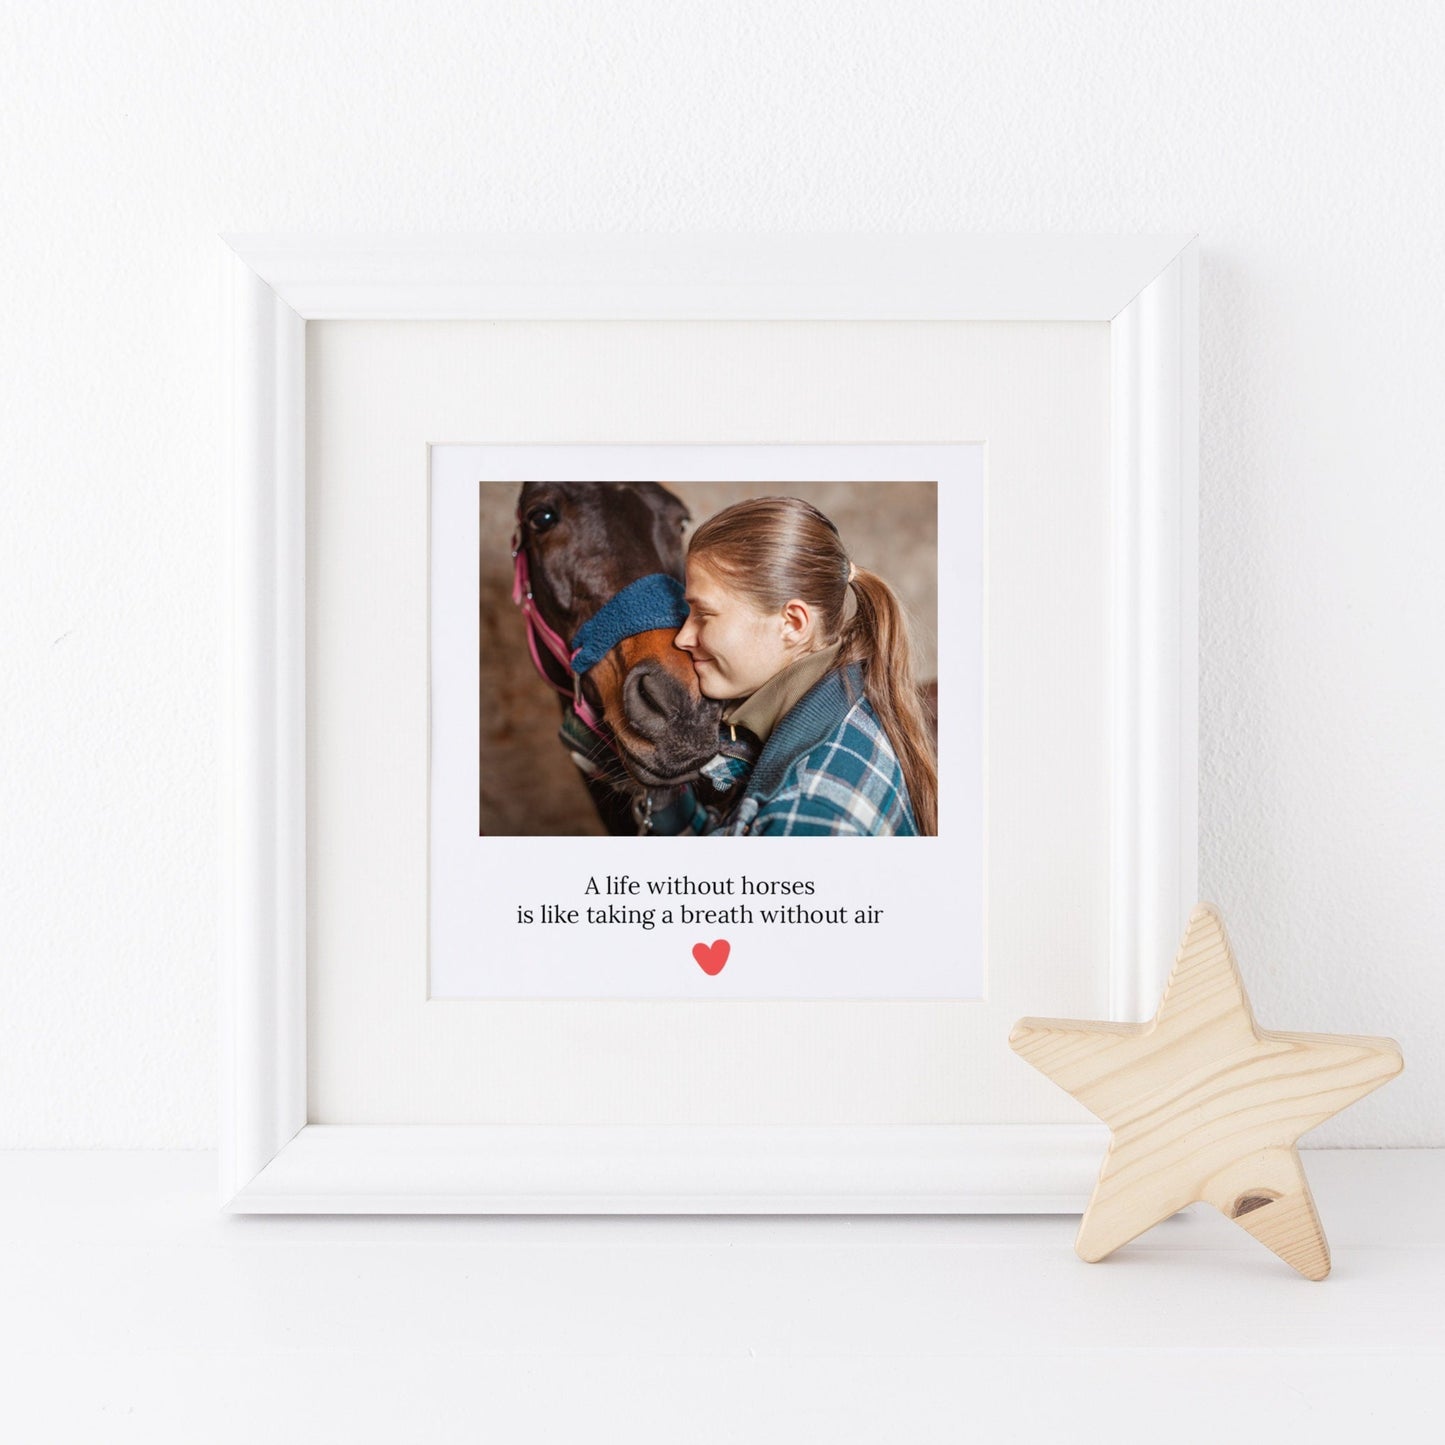 Personalised Framed Horse Photo Print